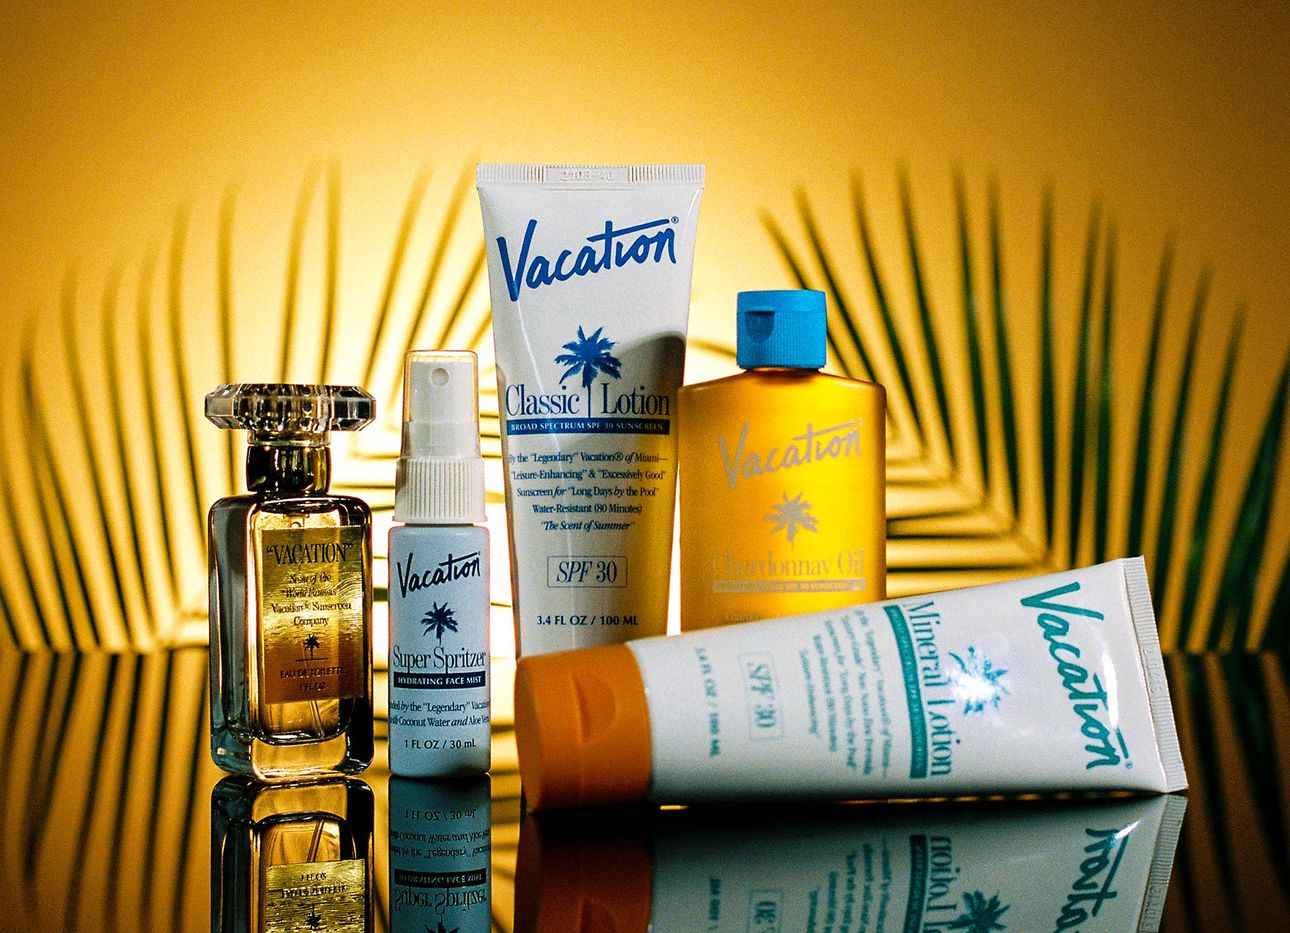 Tubes of sunscreen and a perfume shot in front of palm leaf branches